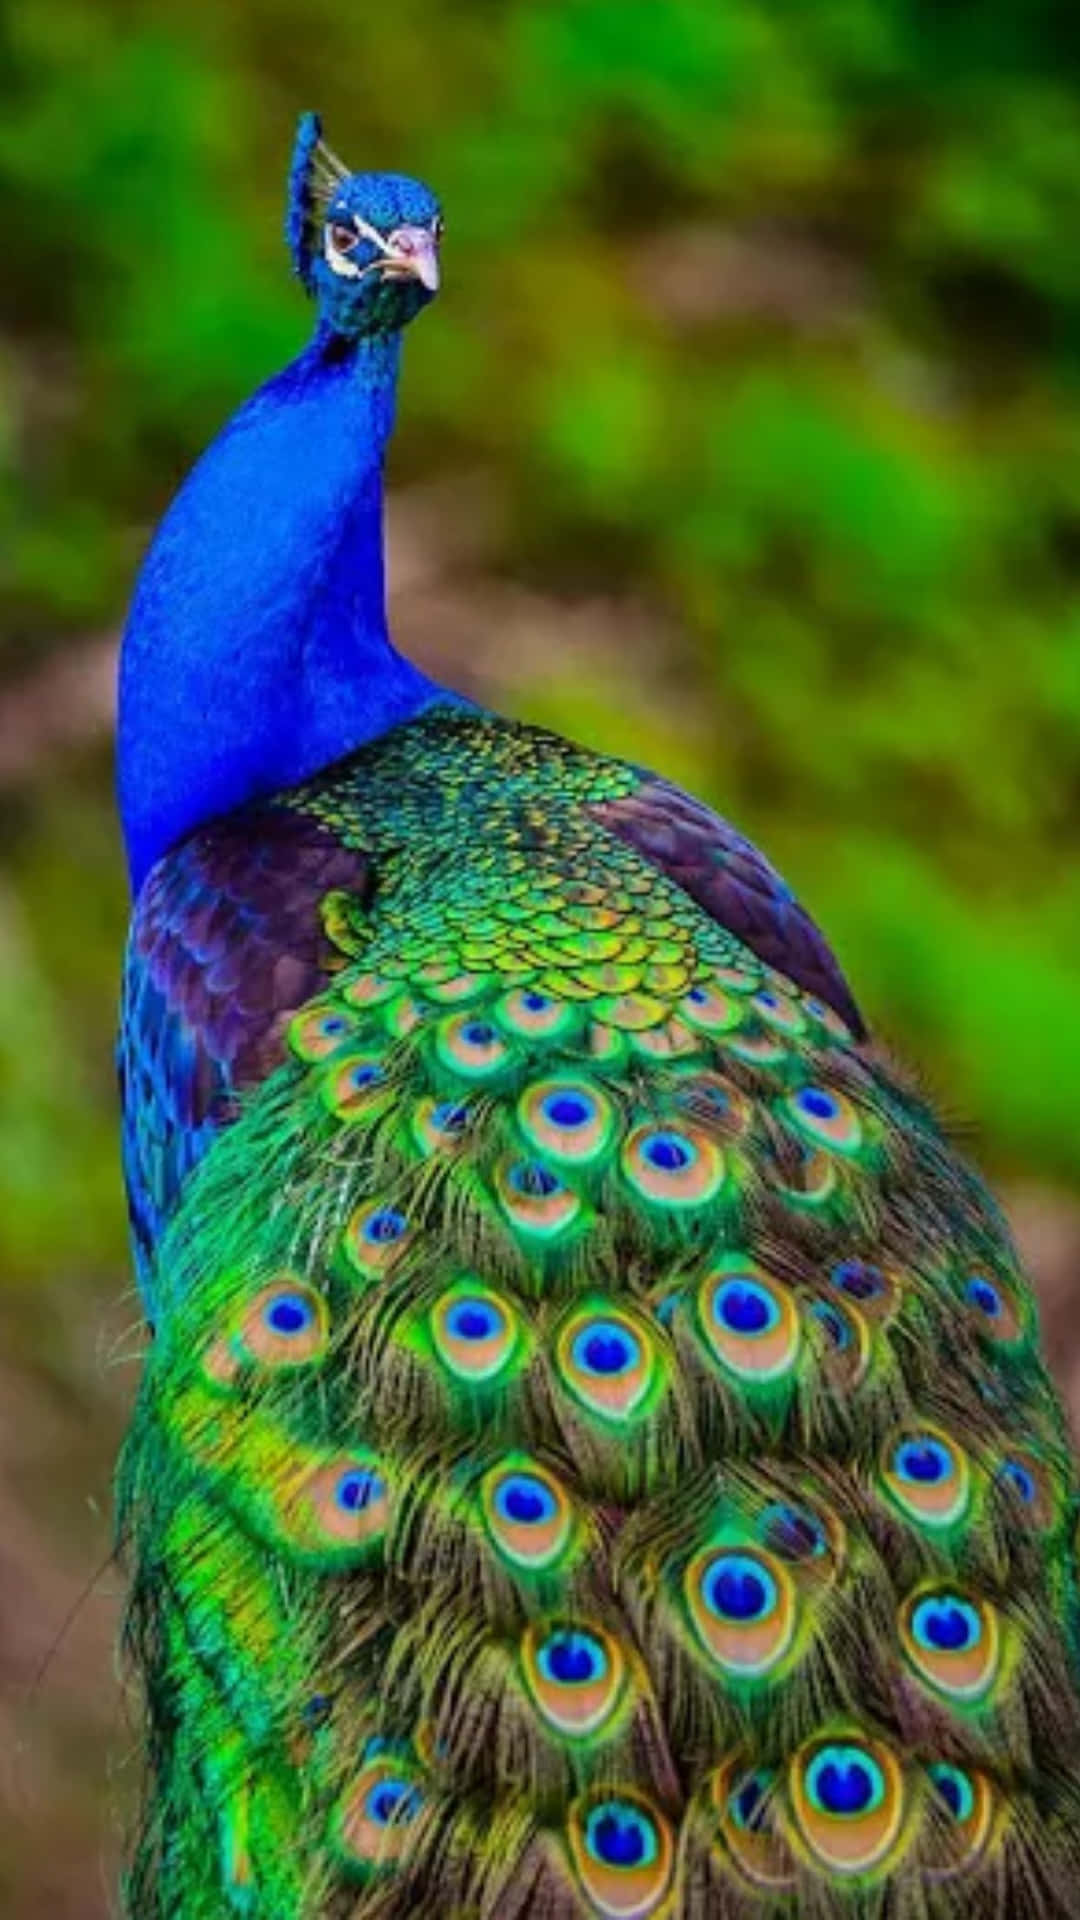 A beautiful Peacock bird perched in a sun-drenched garden